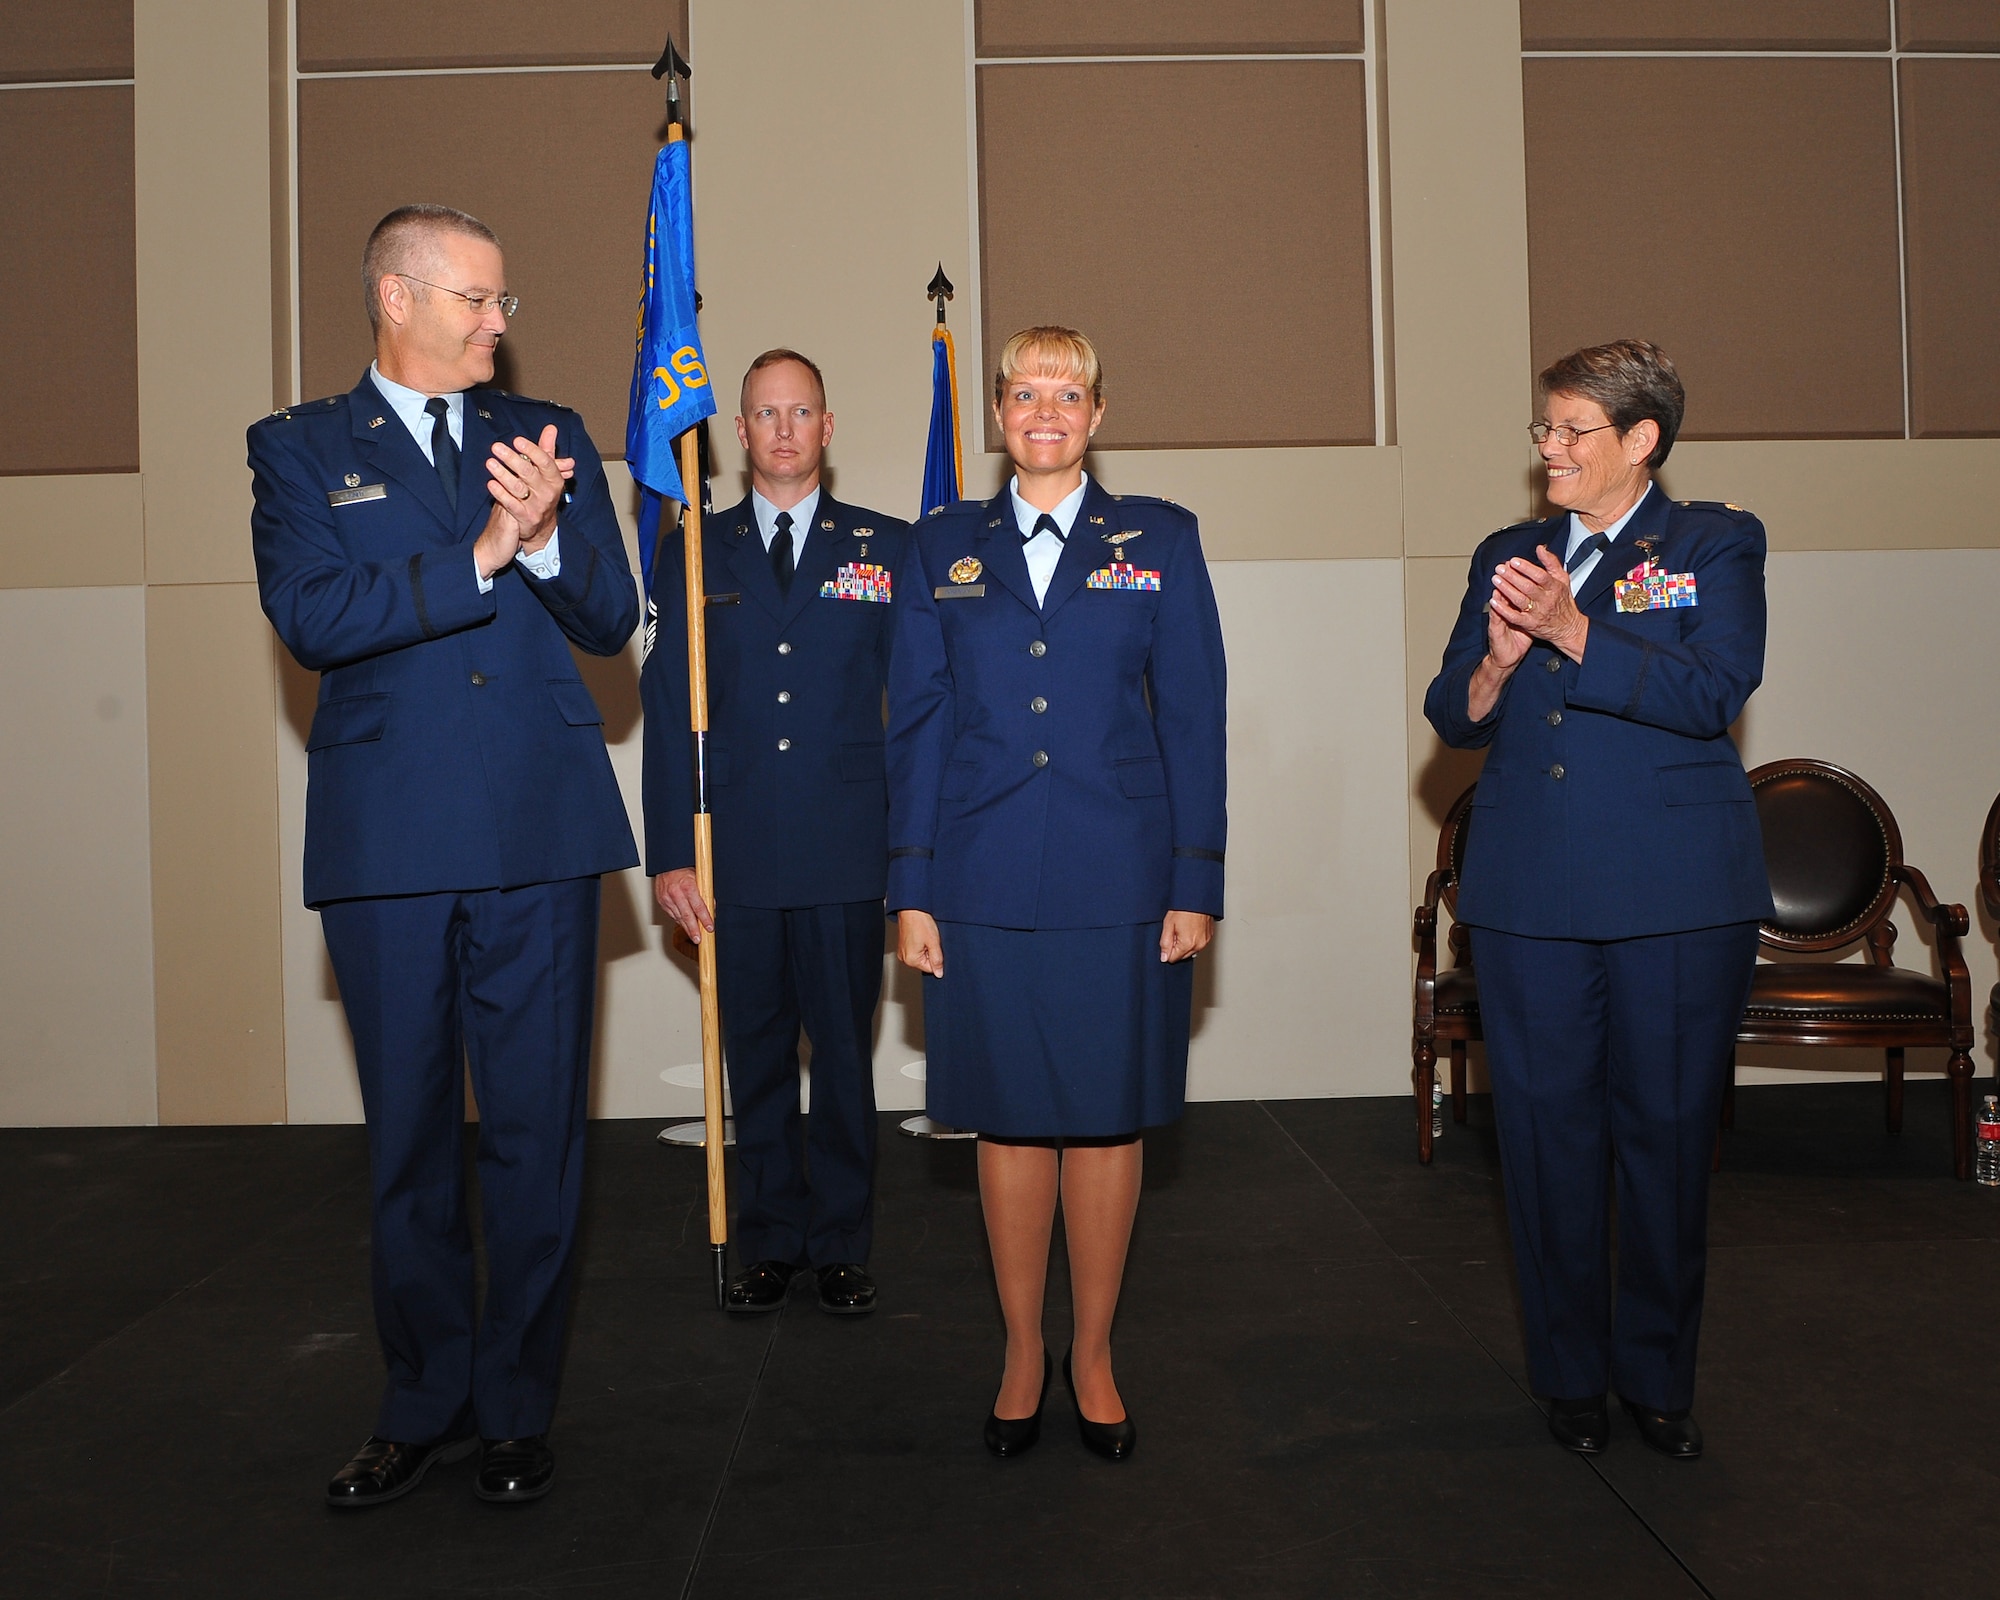 Col. Michael Kindt, 460th Medical Group commander, left, hands the 460th Medical Operations Squadron guidon to Lt. Col. Kelly Dorenkott, 460th MDOS commander, symbolizing her assumption of command during a change of command ceremony July 31, 2014, at the Leadership Development Center on Buckley Air Force Base, Colo. This will be Dorenkott’s second tour at Buckley, returning after serving as deputy chief of medical recruitment for the Office of the Air Force Surgeon General in Washington. (U.S. Air Force photo by Senior Airman Phillip Houk/Released)